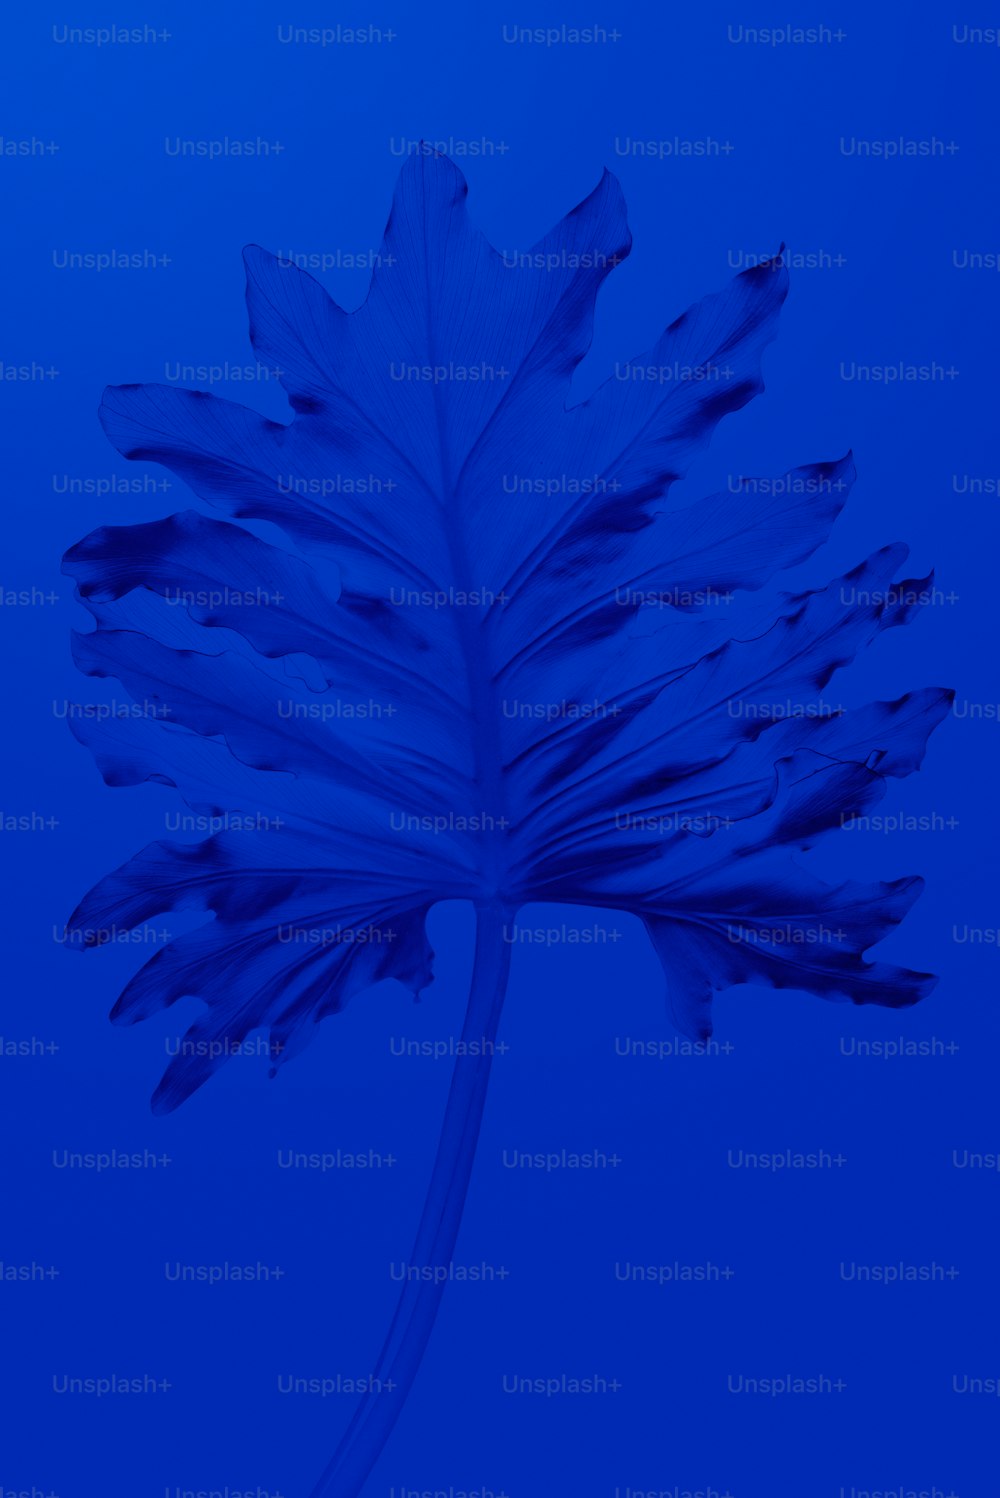 a large blue leaf is shown against a blue background